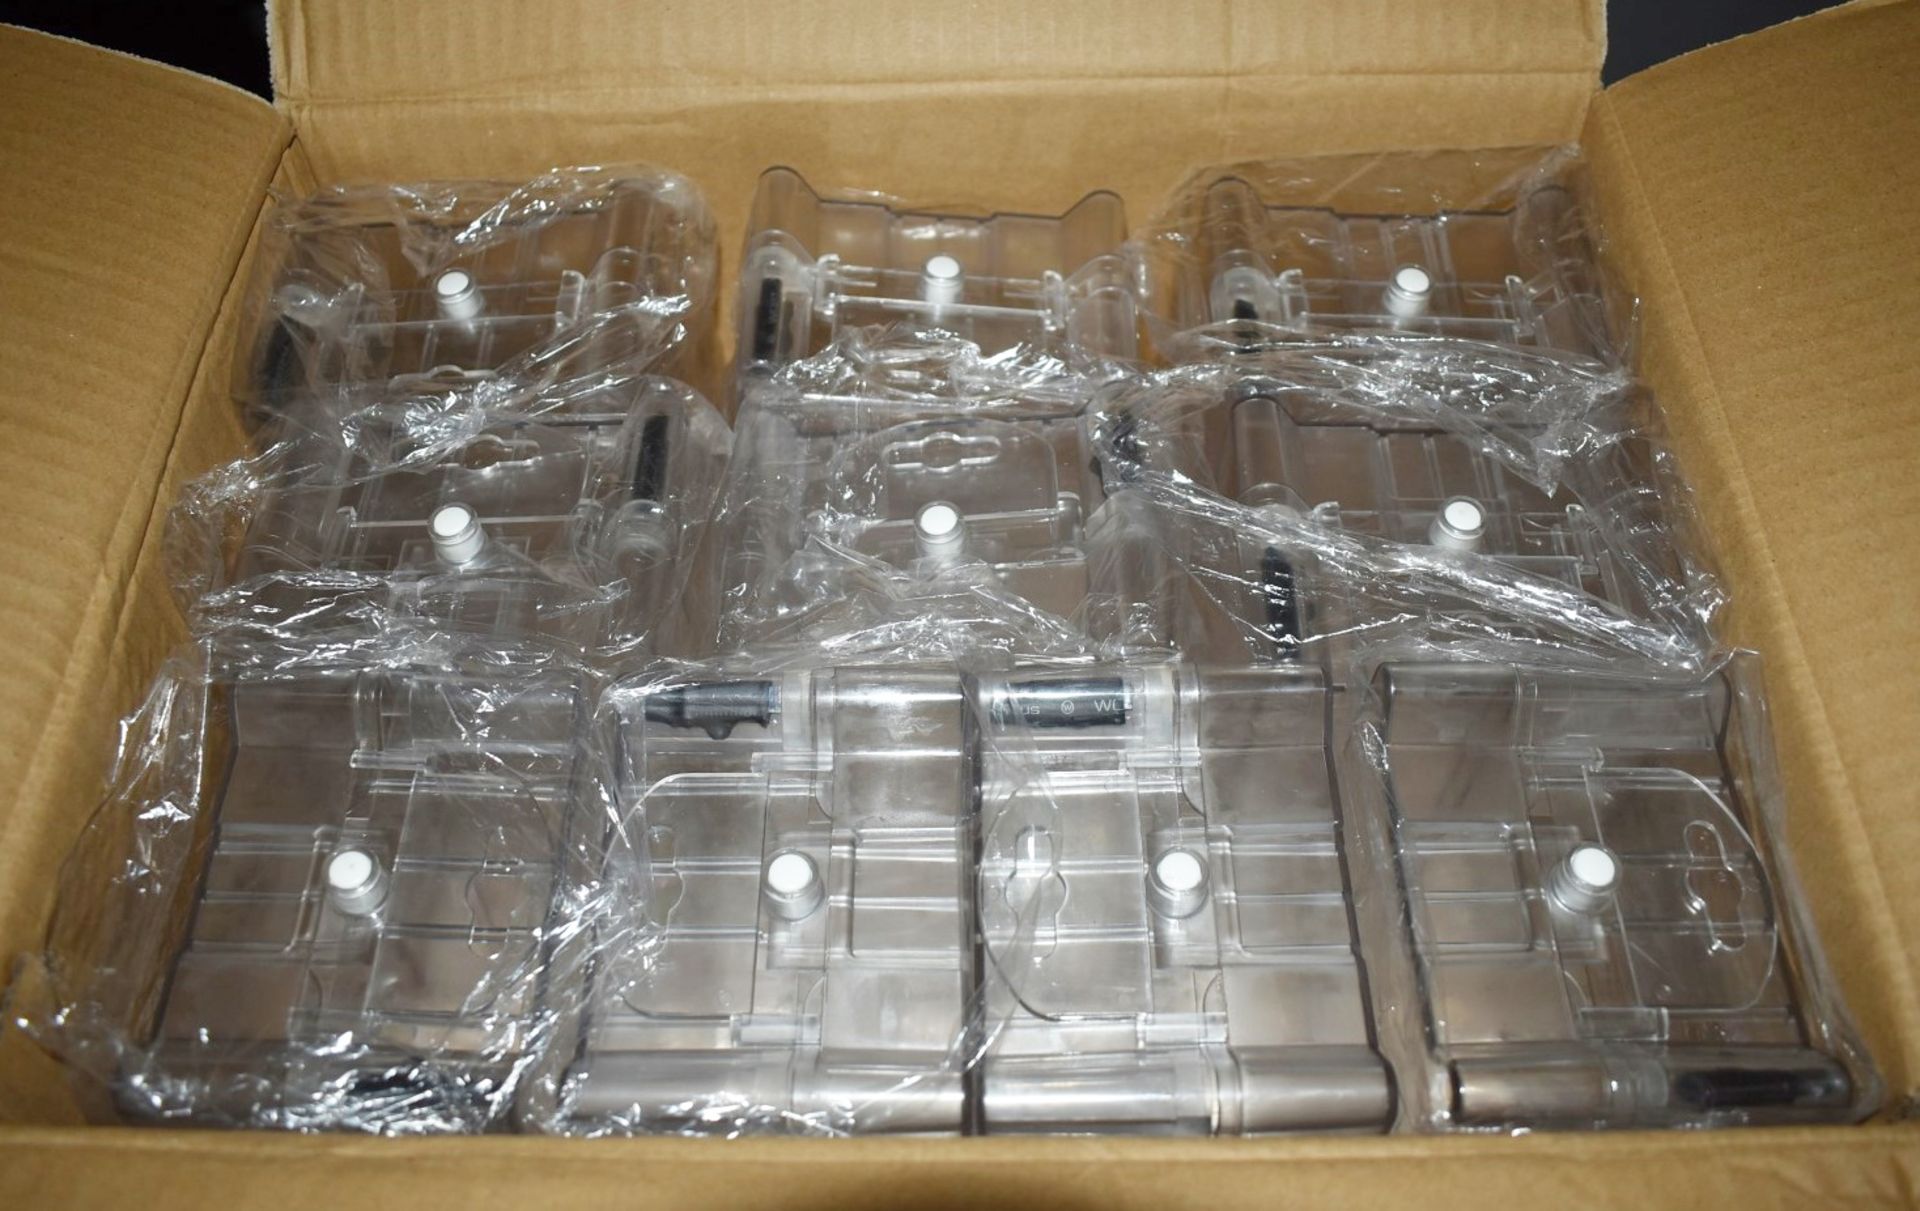 40 x Catalyst Clear Acrylic Retail Security Safer Cases With RF Tags and Hanging Tags - Brand New - Image 9 of 9